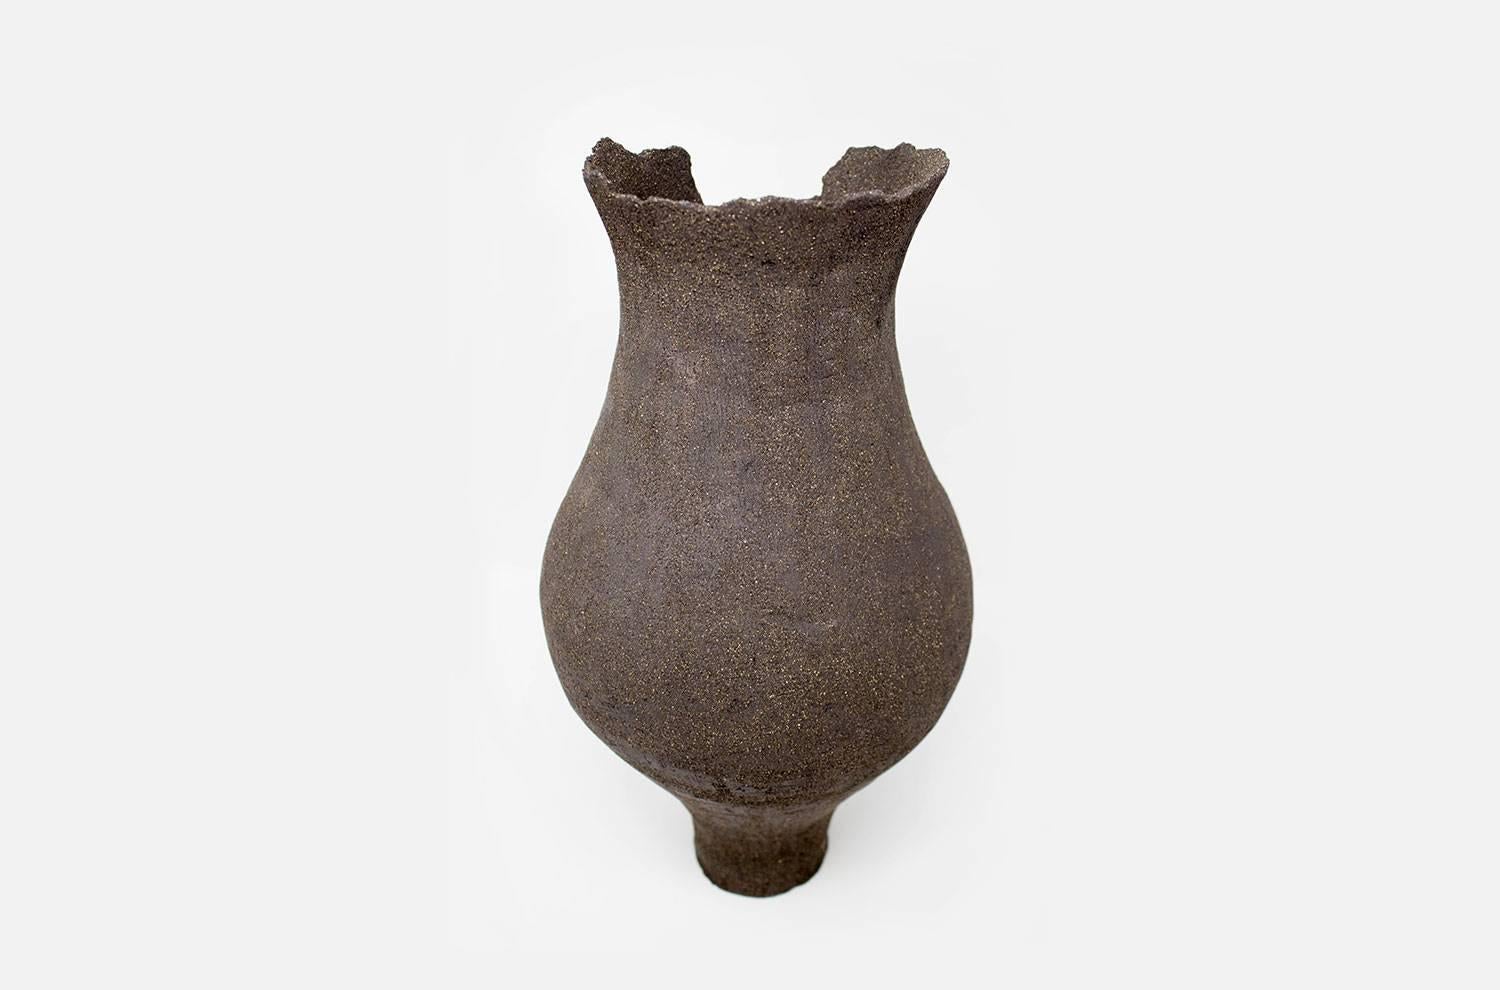 Emily Buck is a ceramic sculptor based in London. She hand-makes her unique sculptures from raw materials; reinterpreting ancient forms for a modern audience. This series, both sensual and classical is inspired by the female form and works are named